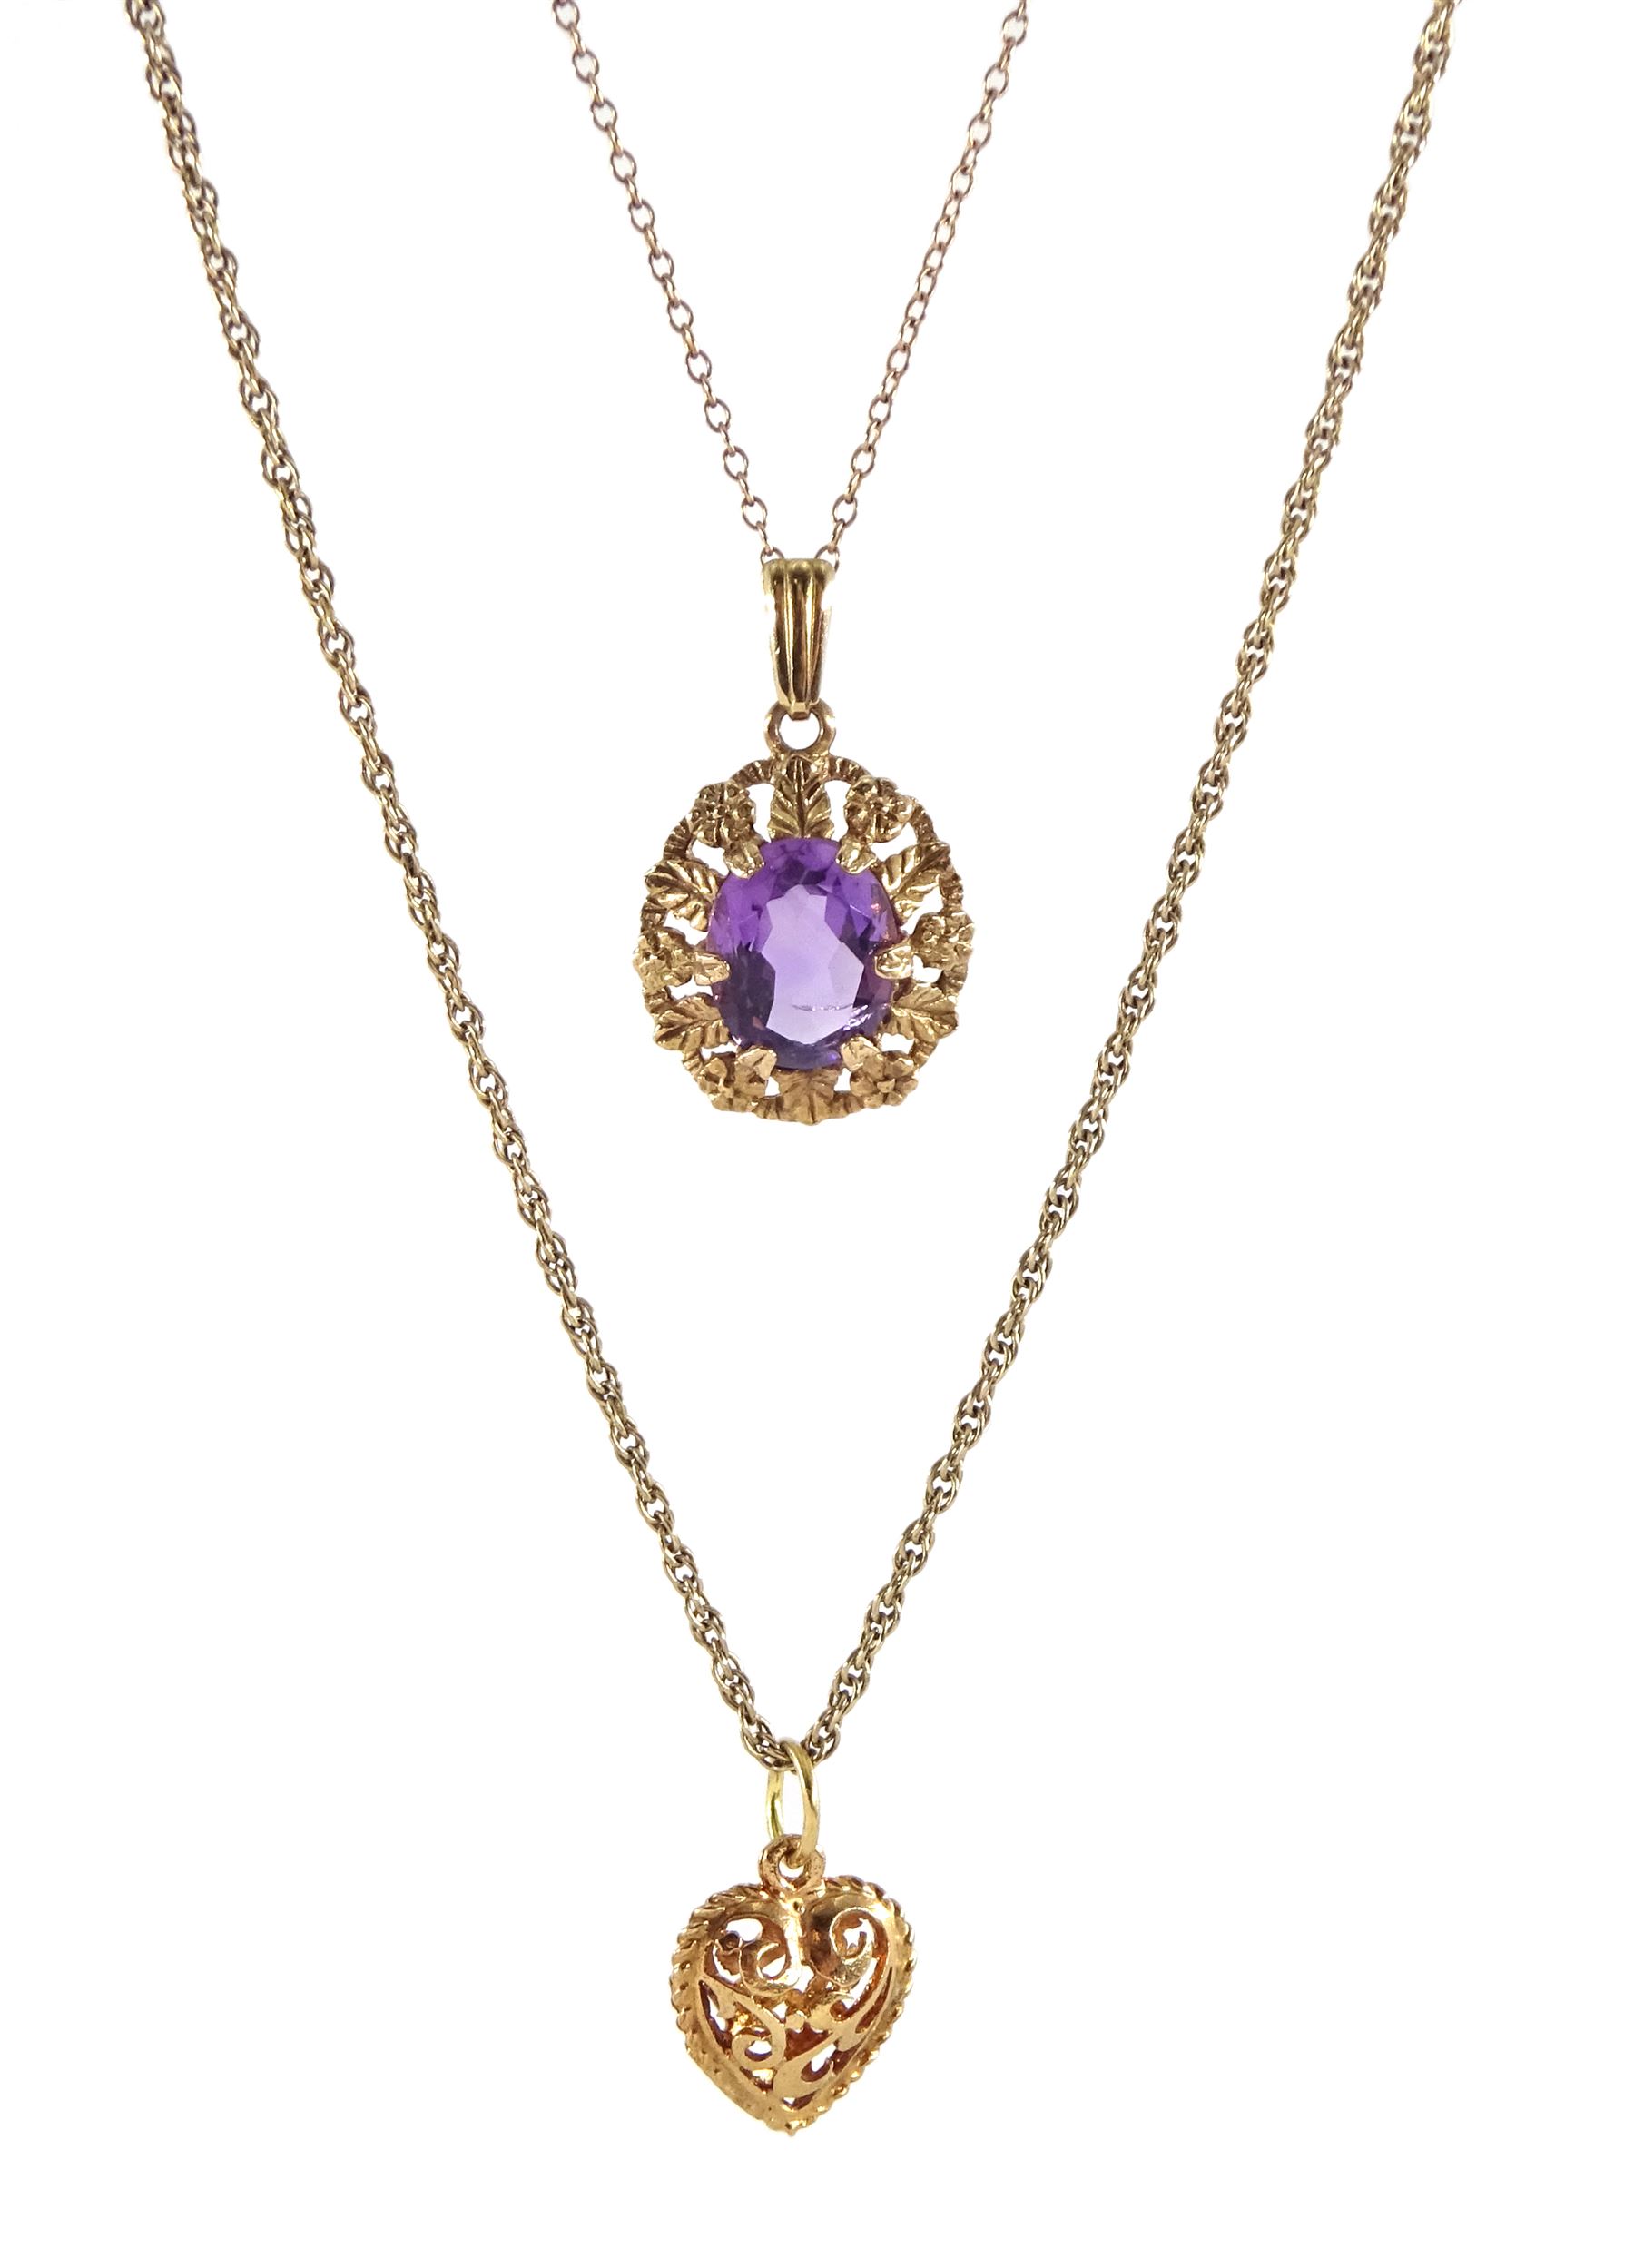 Gold oval amethyst pendant necklace and gold heart pendant necklace